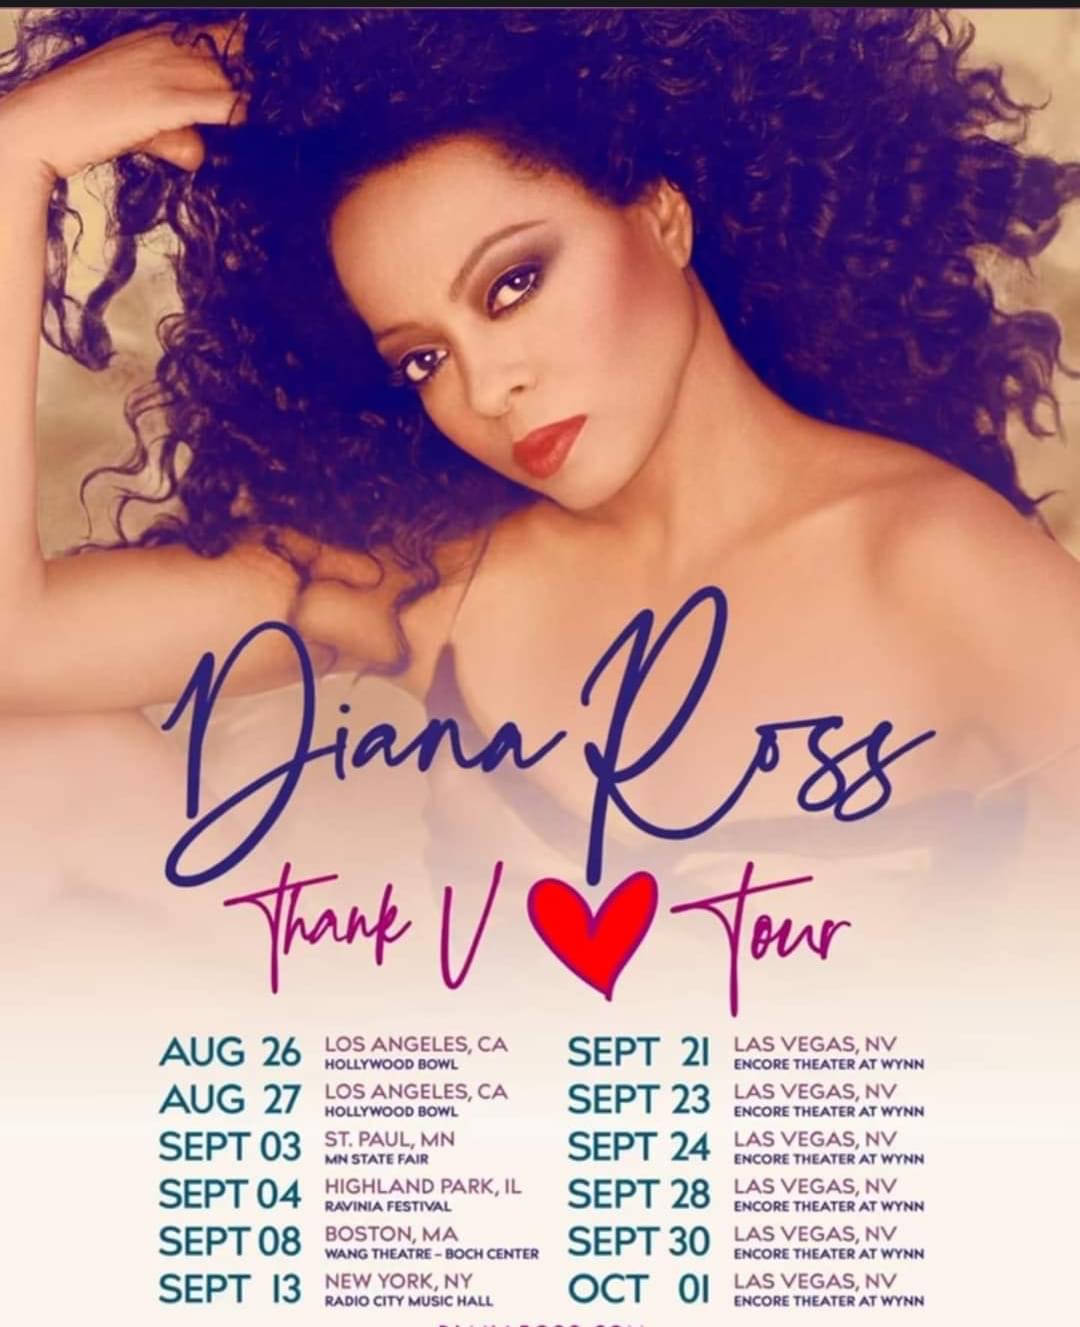 Diana Ross at Radio City Music Hall on Tue, Sep 13th, 2022 - 6:30 pm